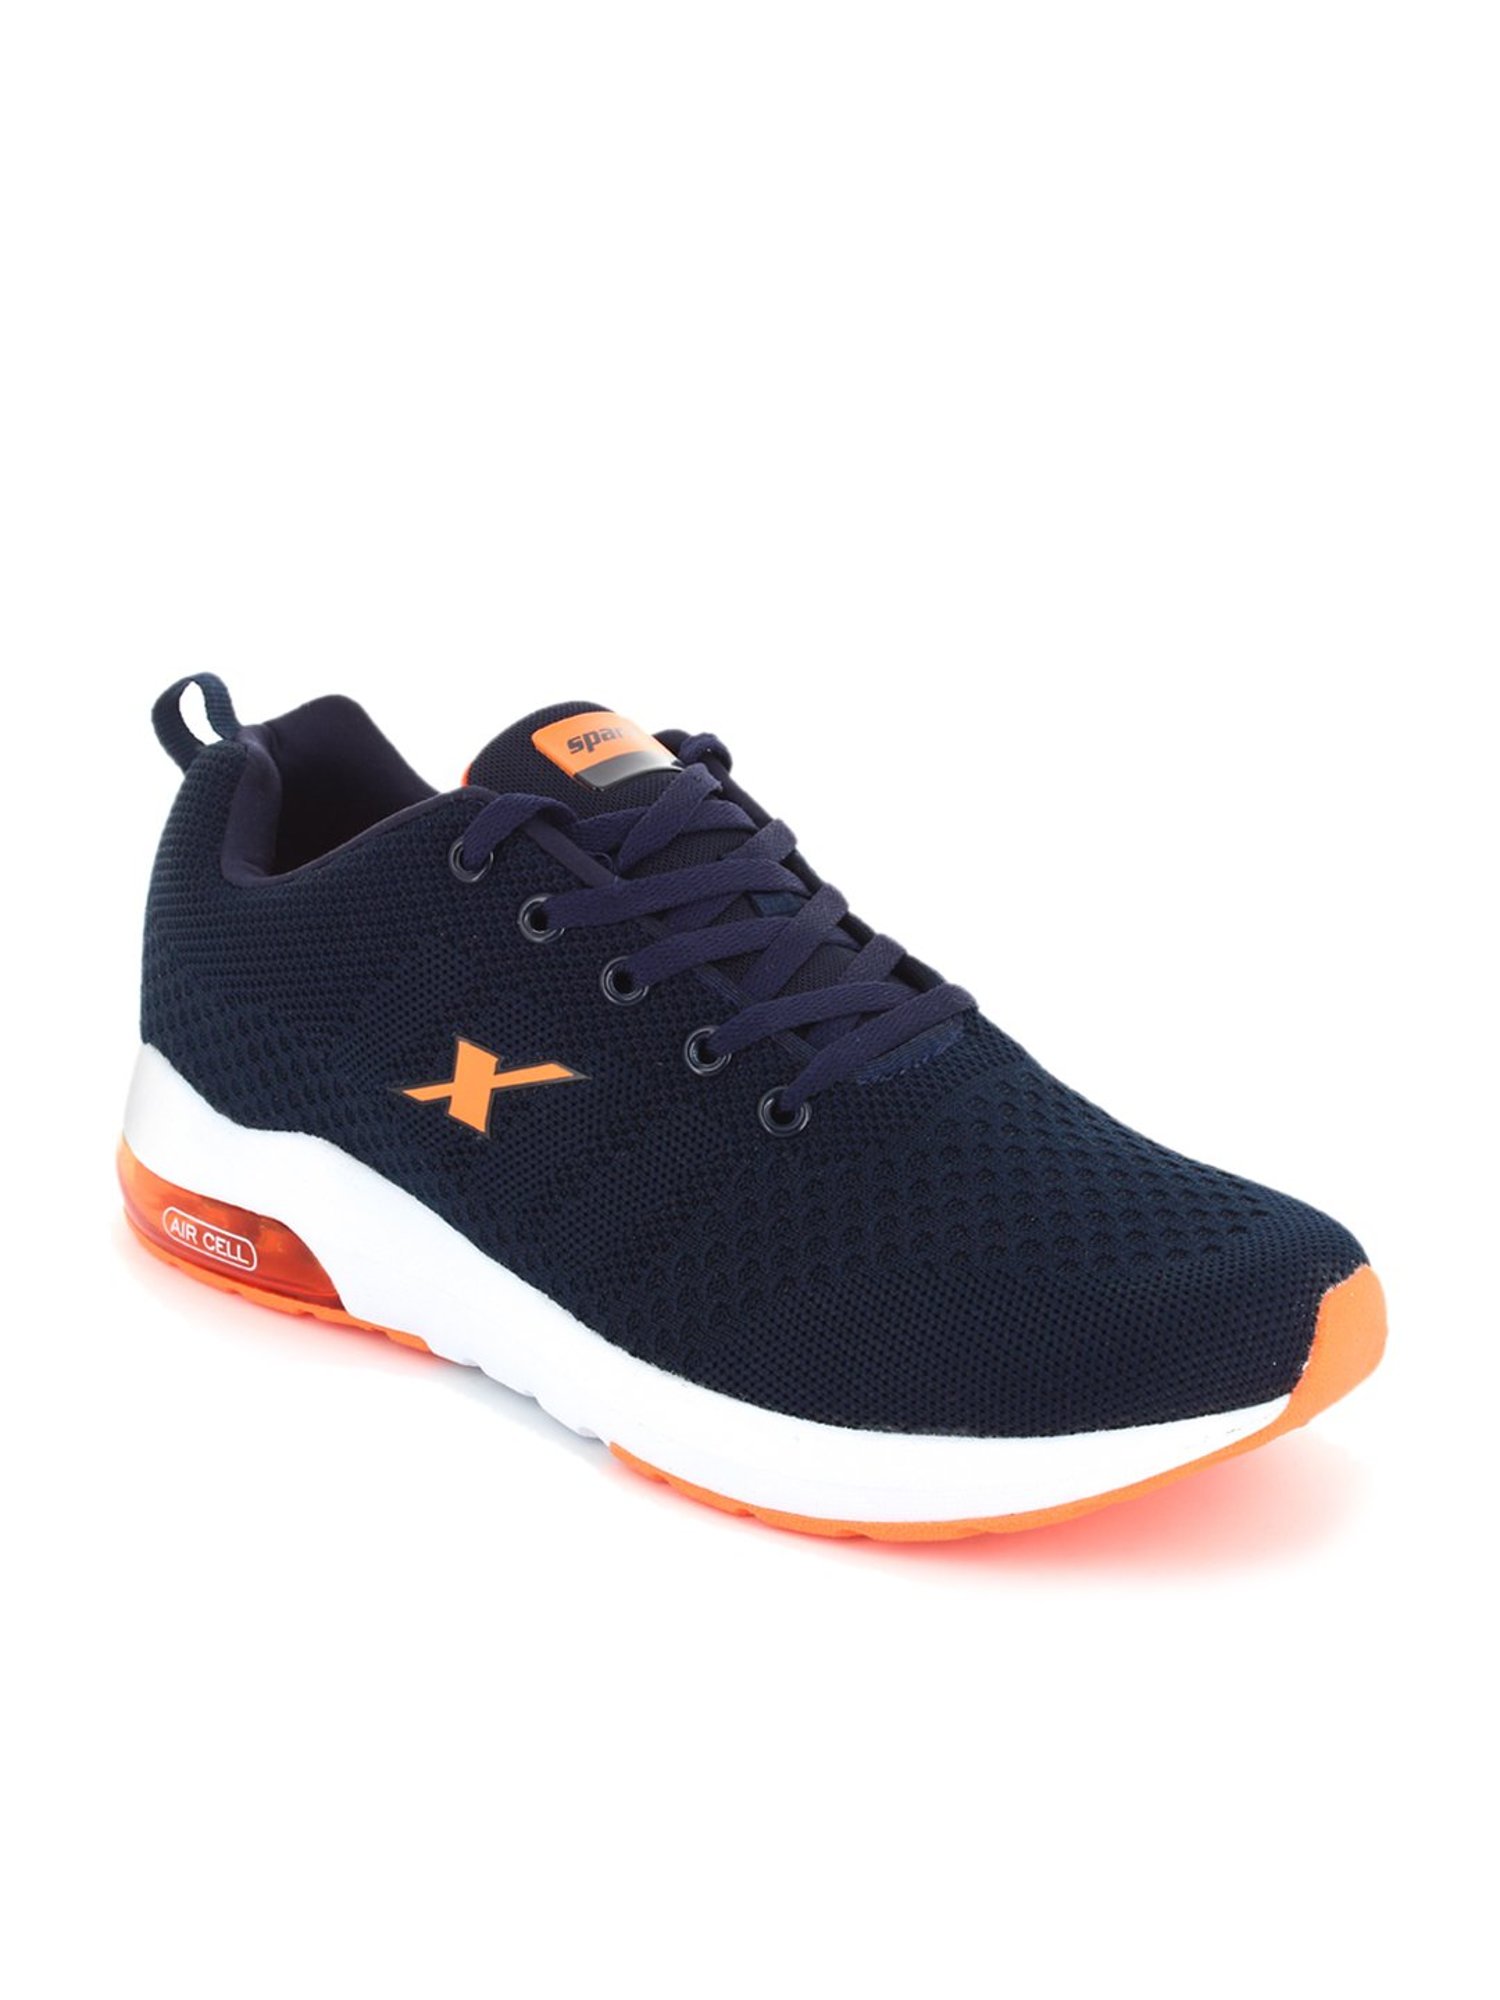 Buy Athleisure shoes for men SM 375 - Shoes for Men | Relaxo